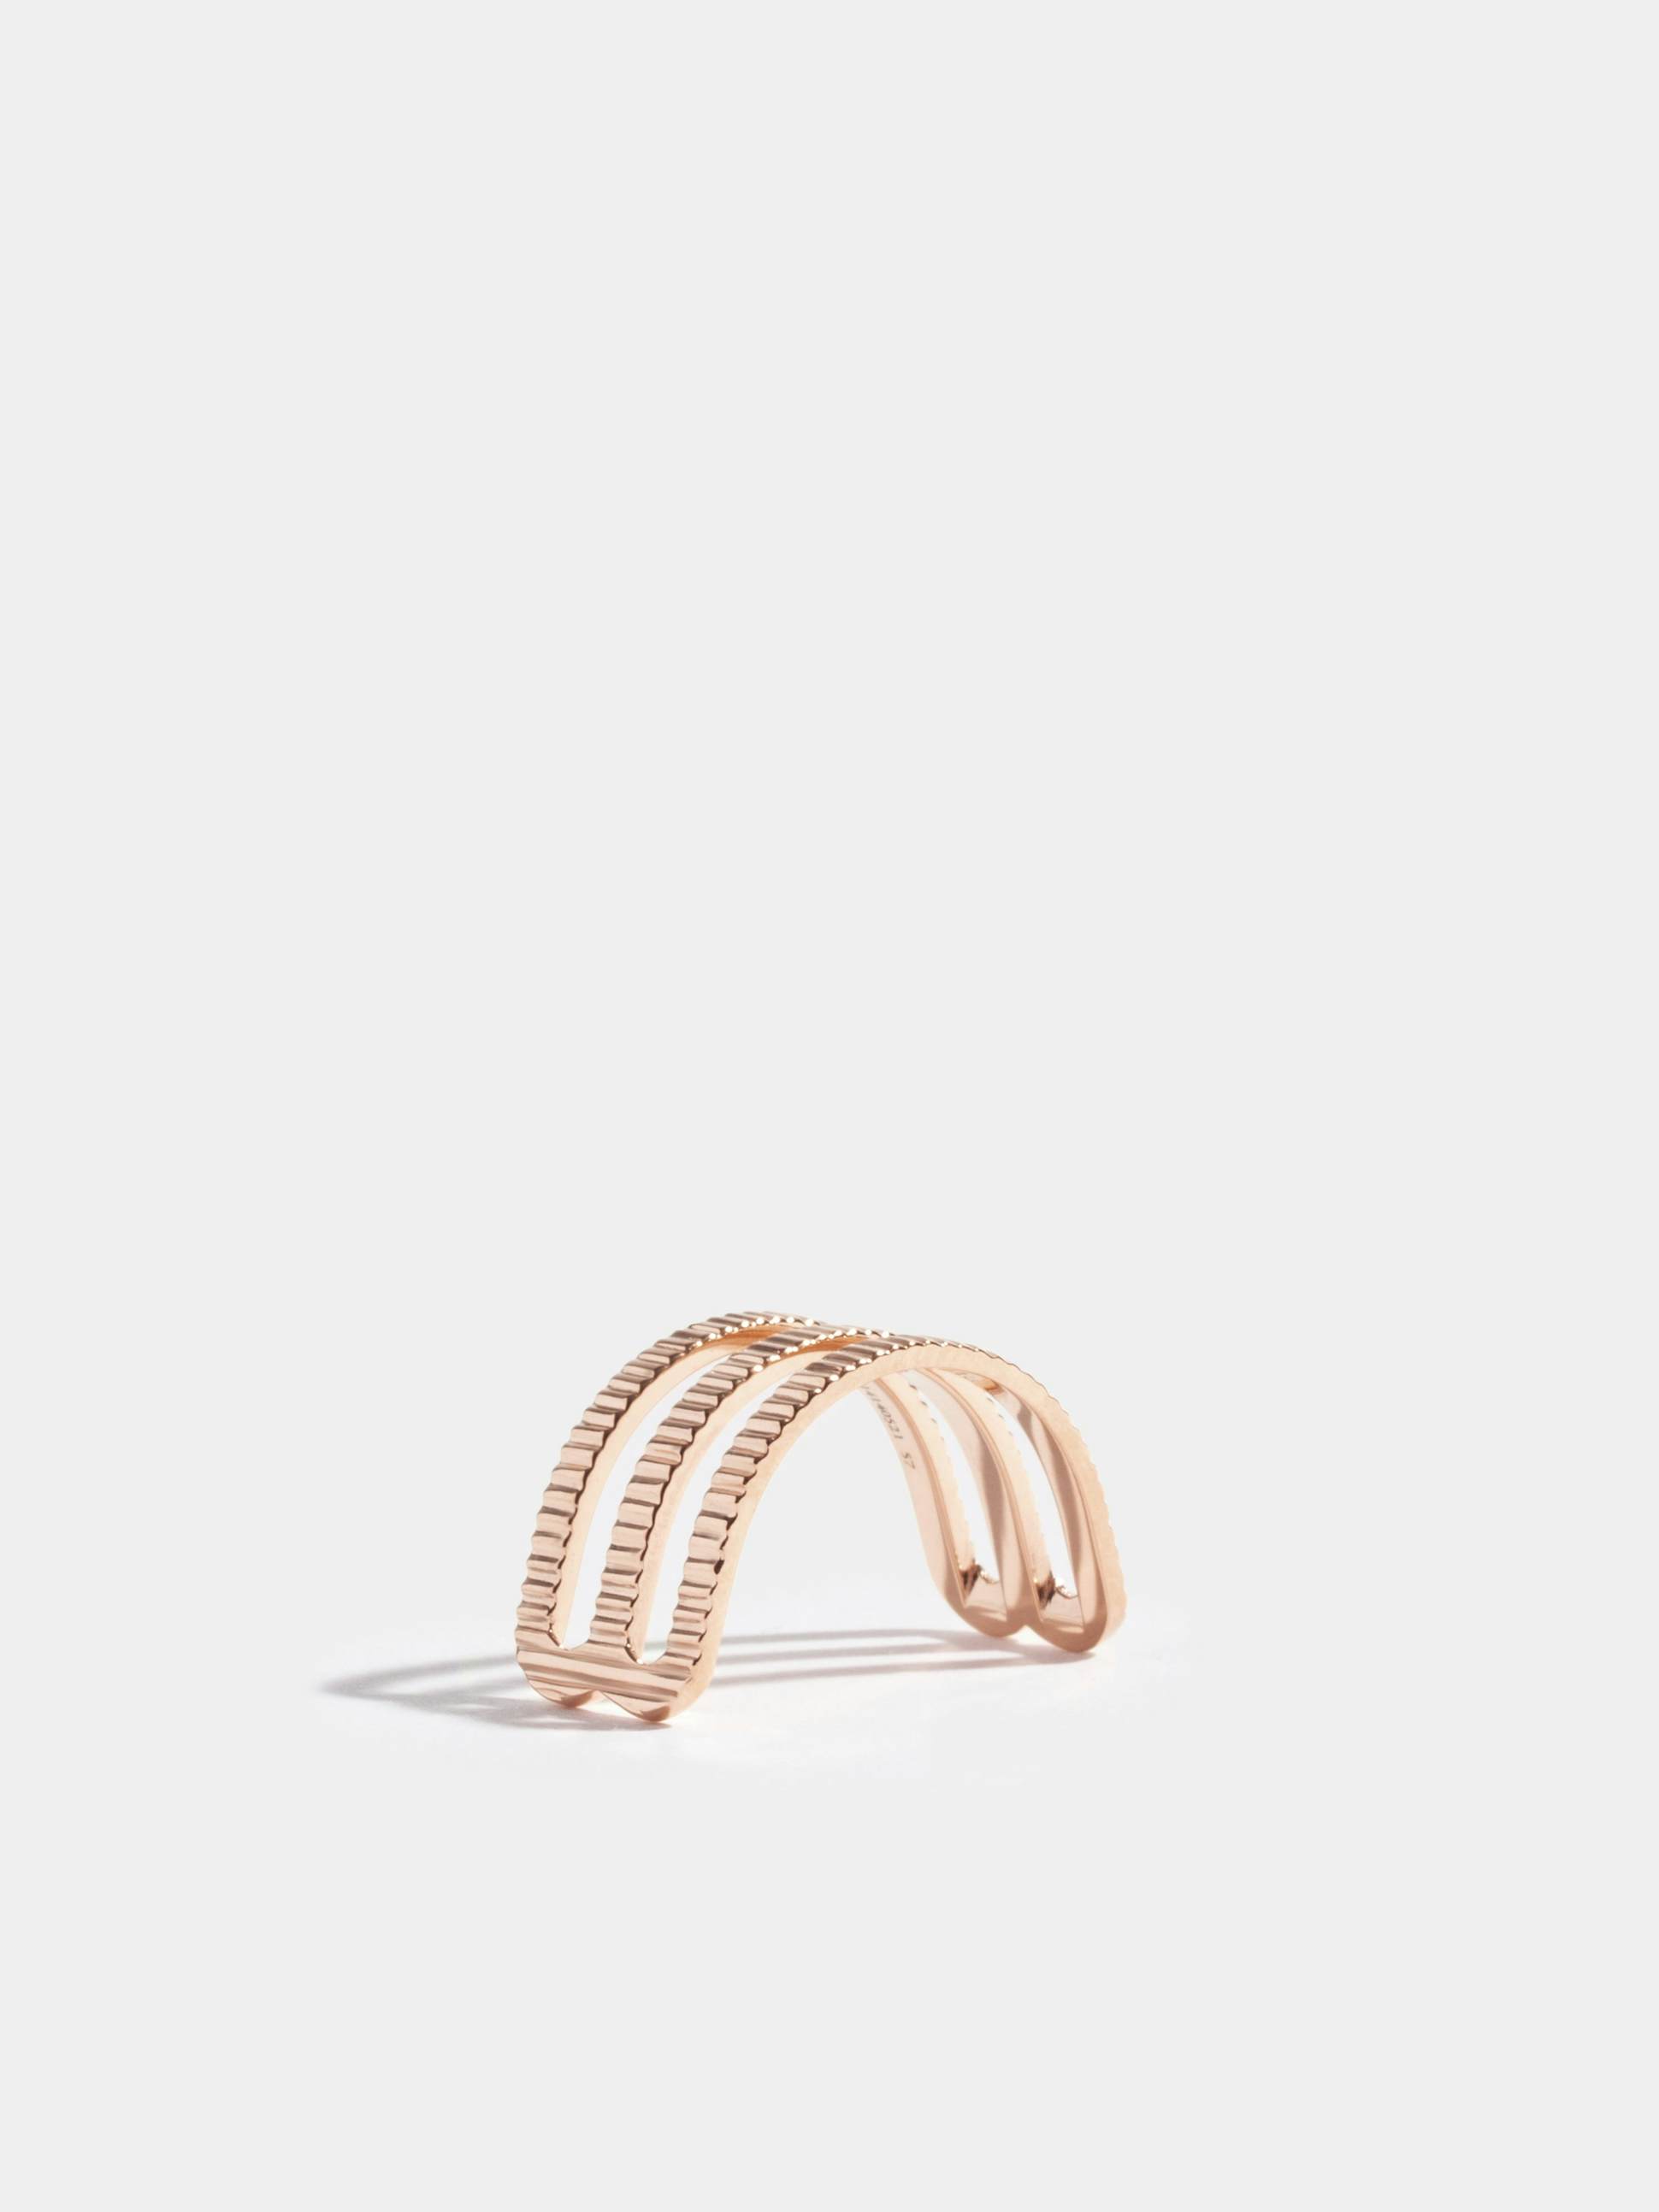 Étreintes double half-ring in 18k Fairmined ethical rose gold, with ridges finish.